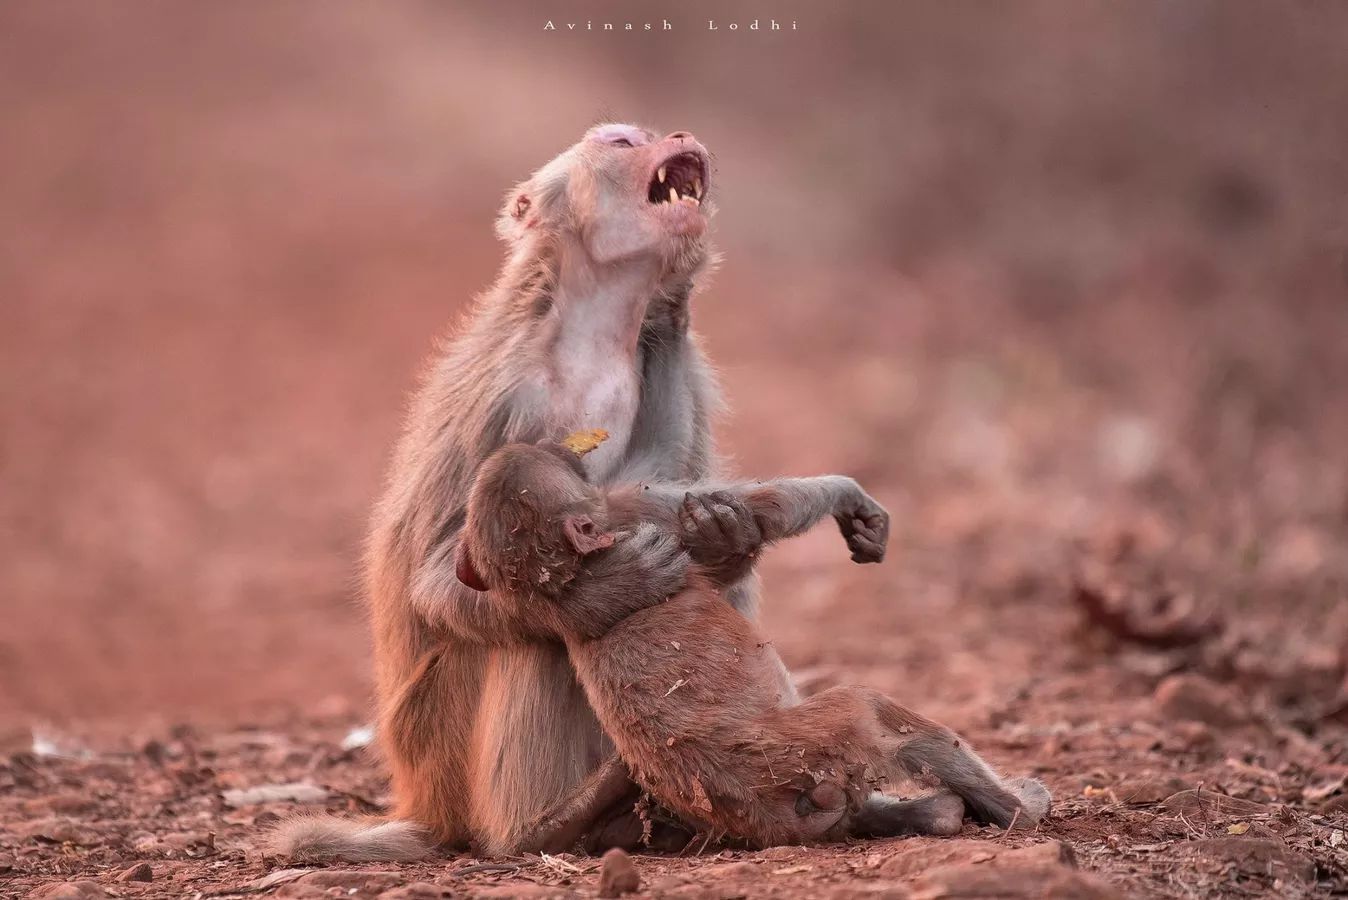 Mother Monkey’s Heartbreaking Cry Upon Losing Her Baby Leaves Many Moved